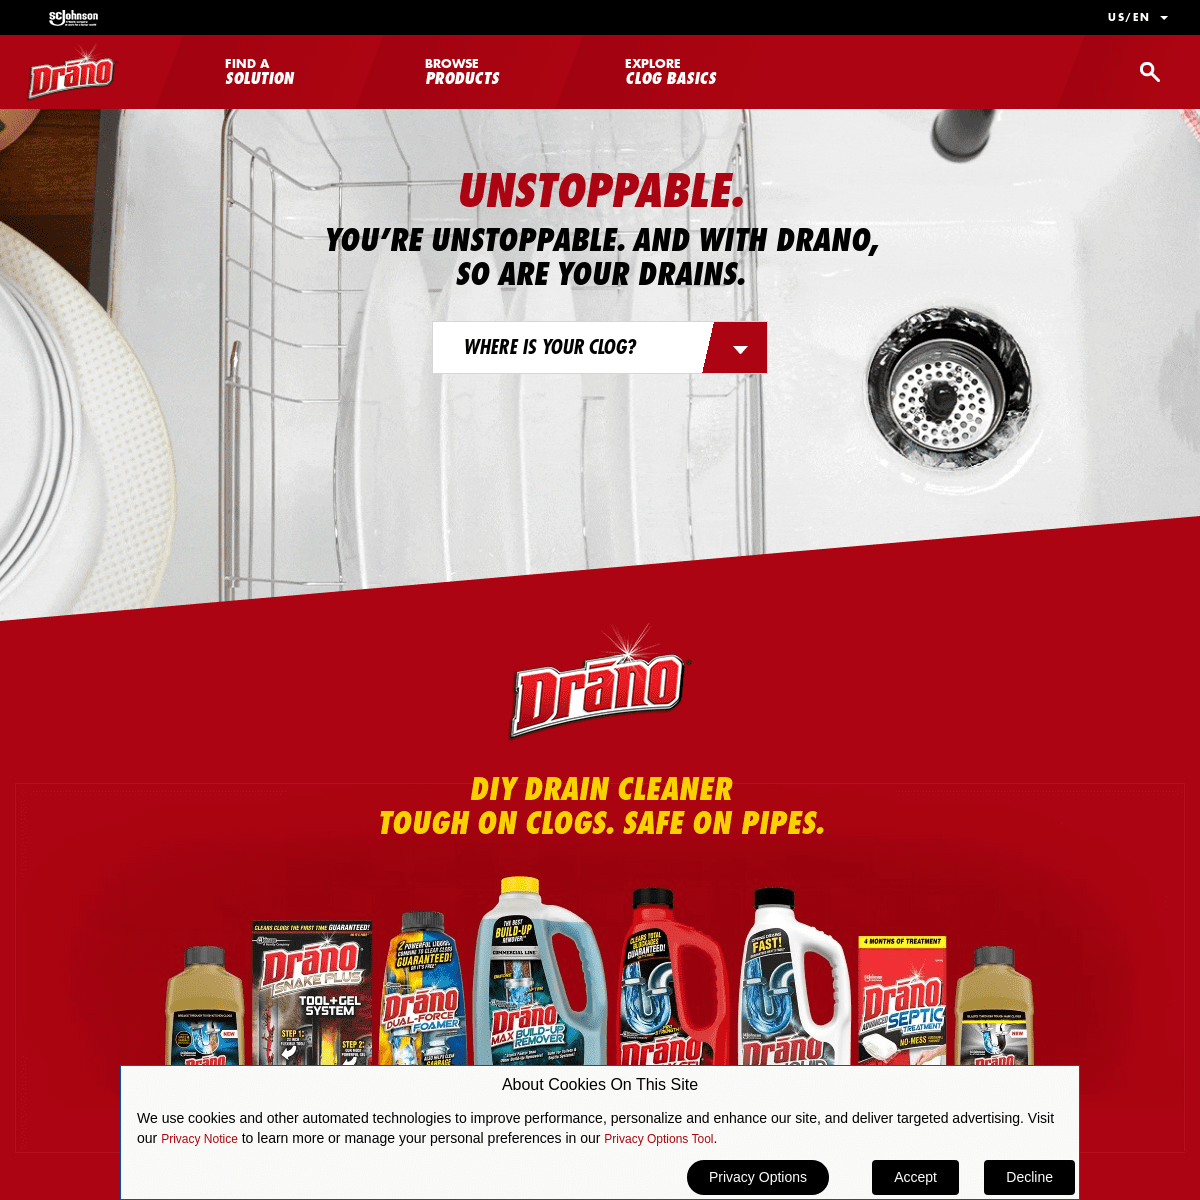 A complete backup of https://drano.com